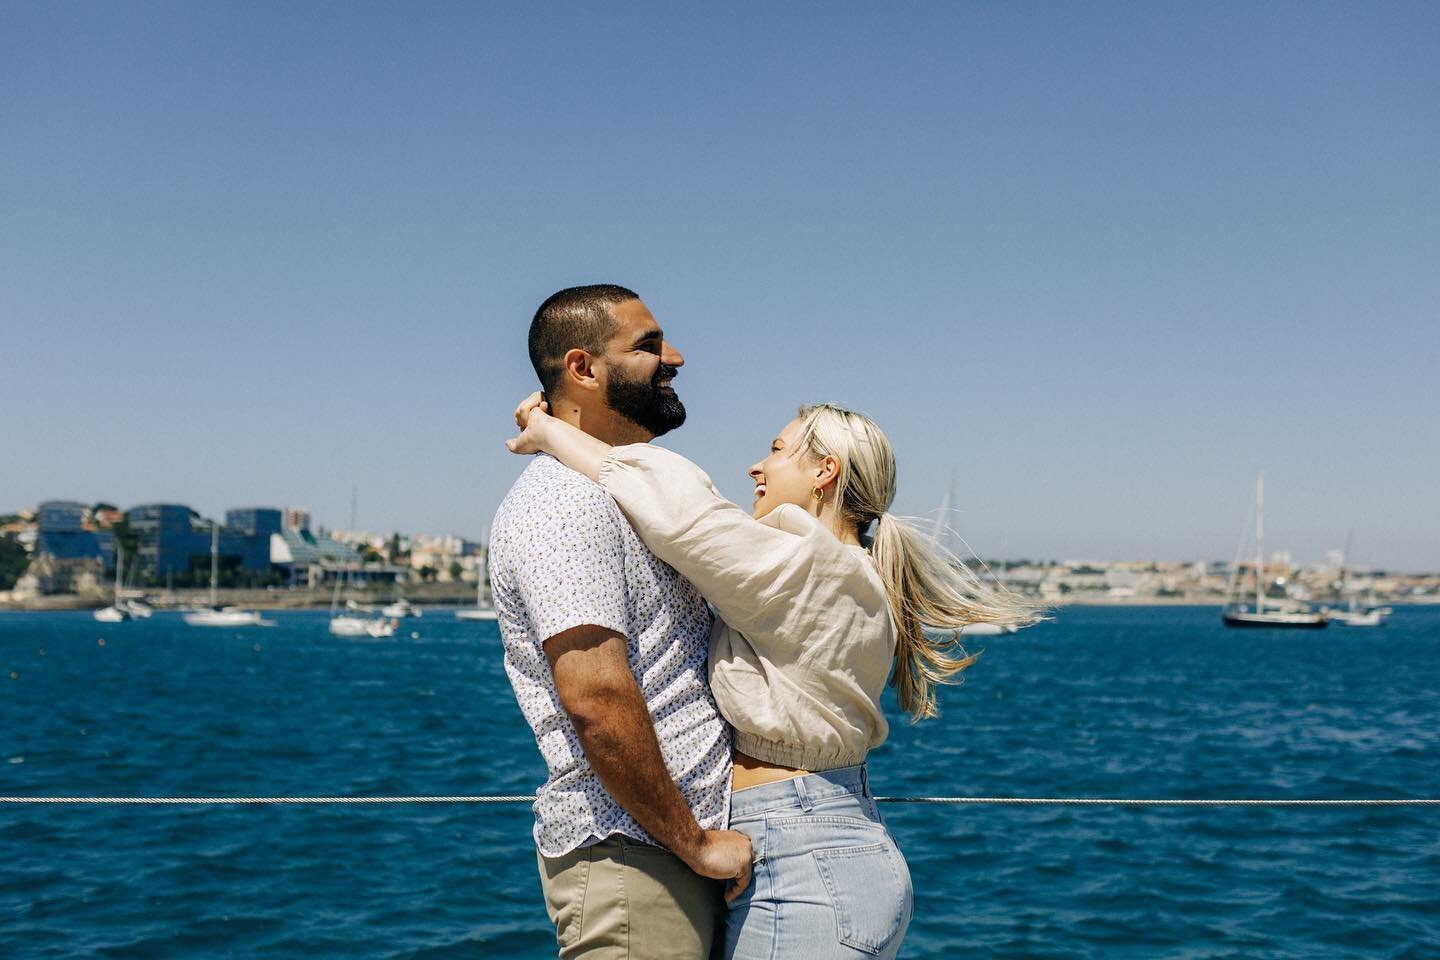 Super casual, these two and all their magic, the day before their wedding, in Cascais, Portugal.⁠
Helloooooo blue water.⁠
⁠
The past two weeks have been insane, between shooting an engagement, 3 weddings, and various other projects, two continents, j